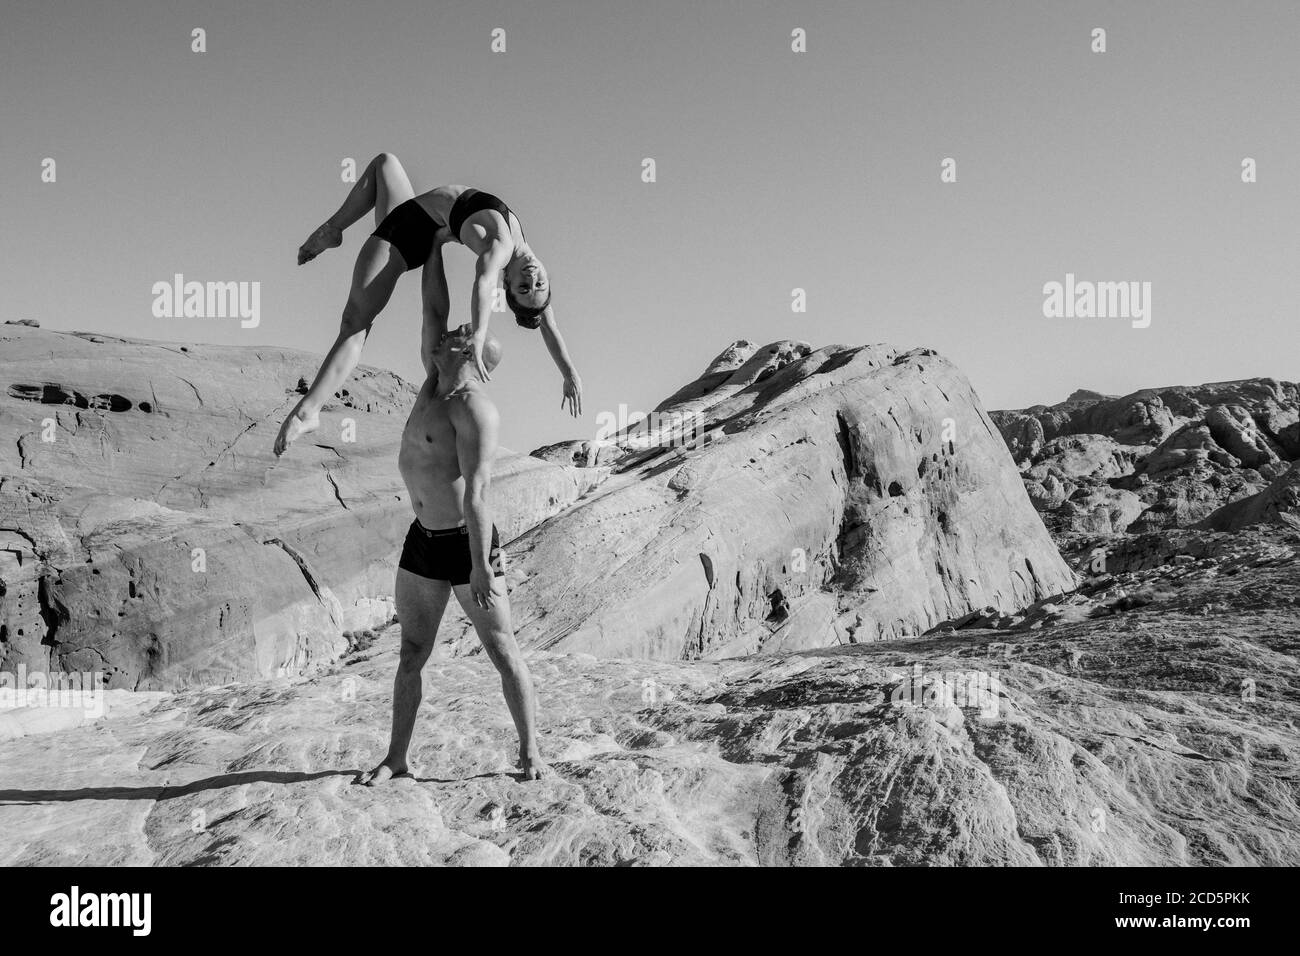 Balancing pair of gymnasts in desert,  State Park, Overton, Nevada, USA Stock Photo